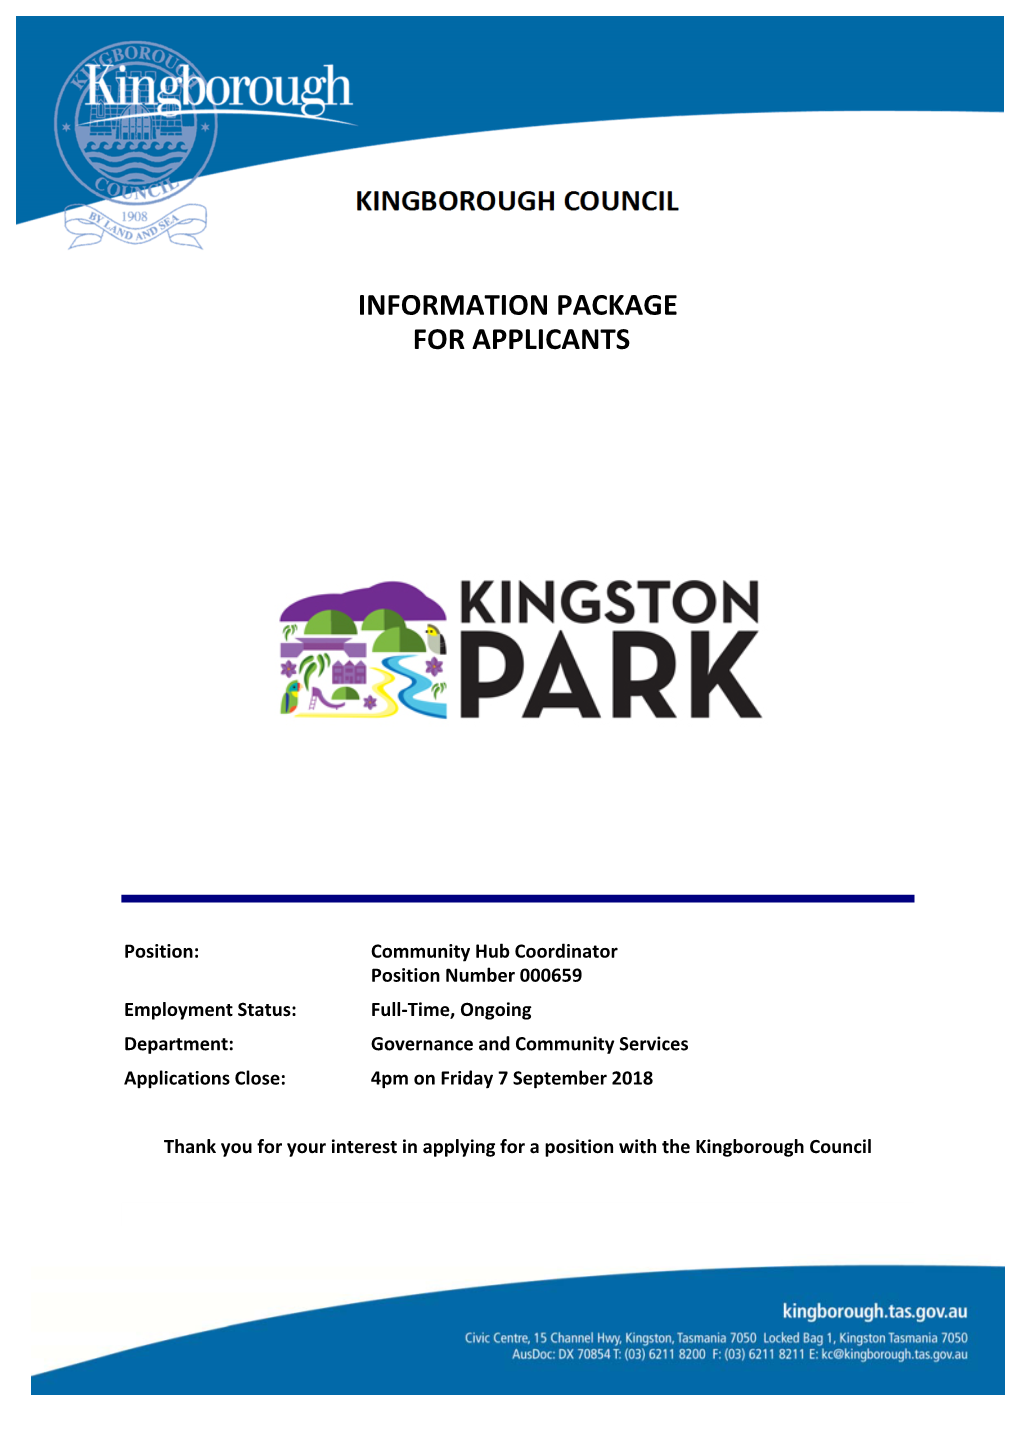 Kingborough Council Information Package For